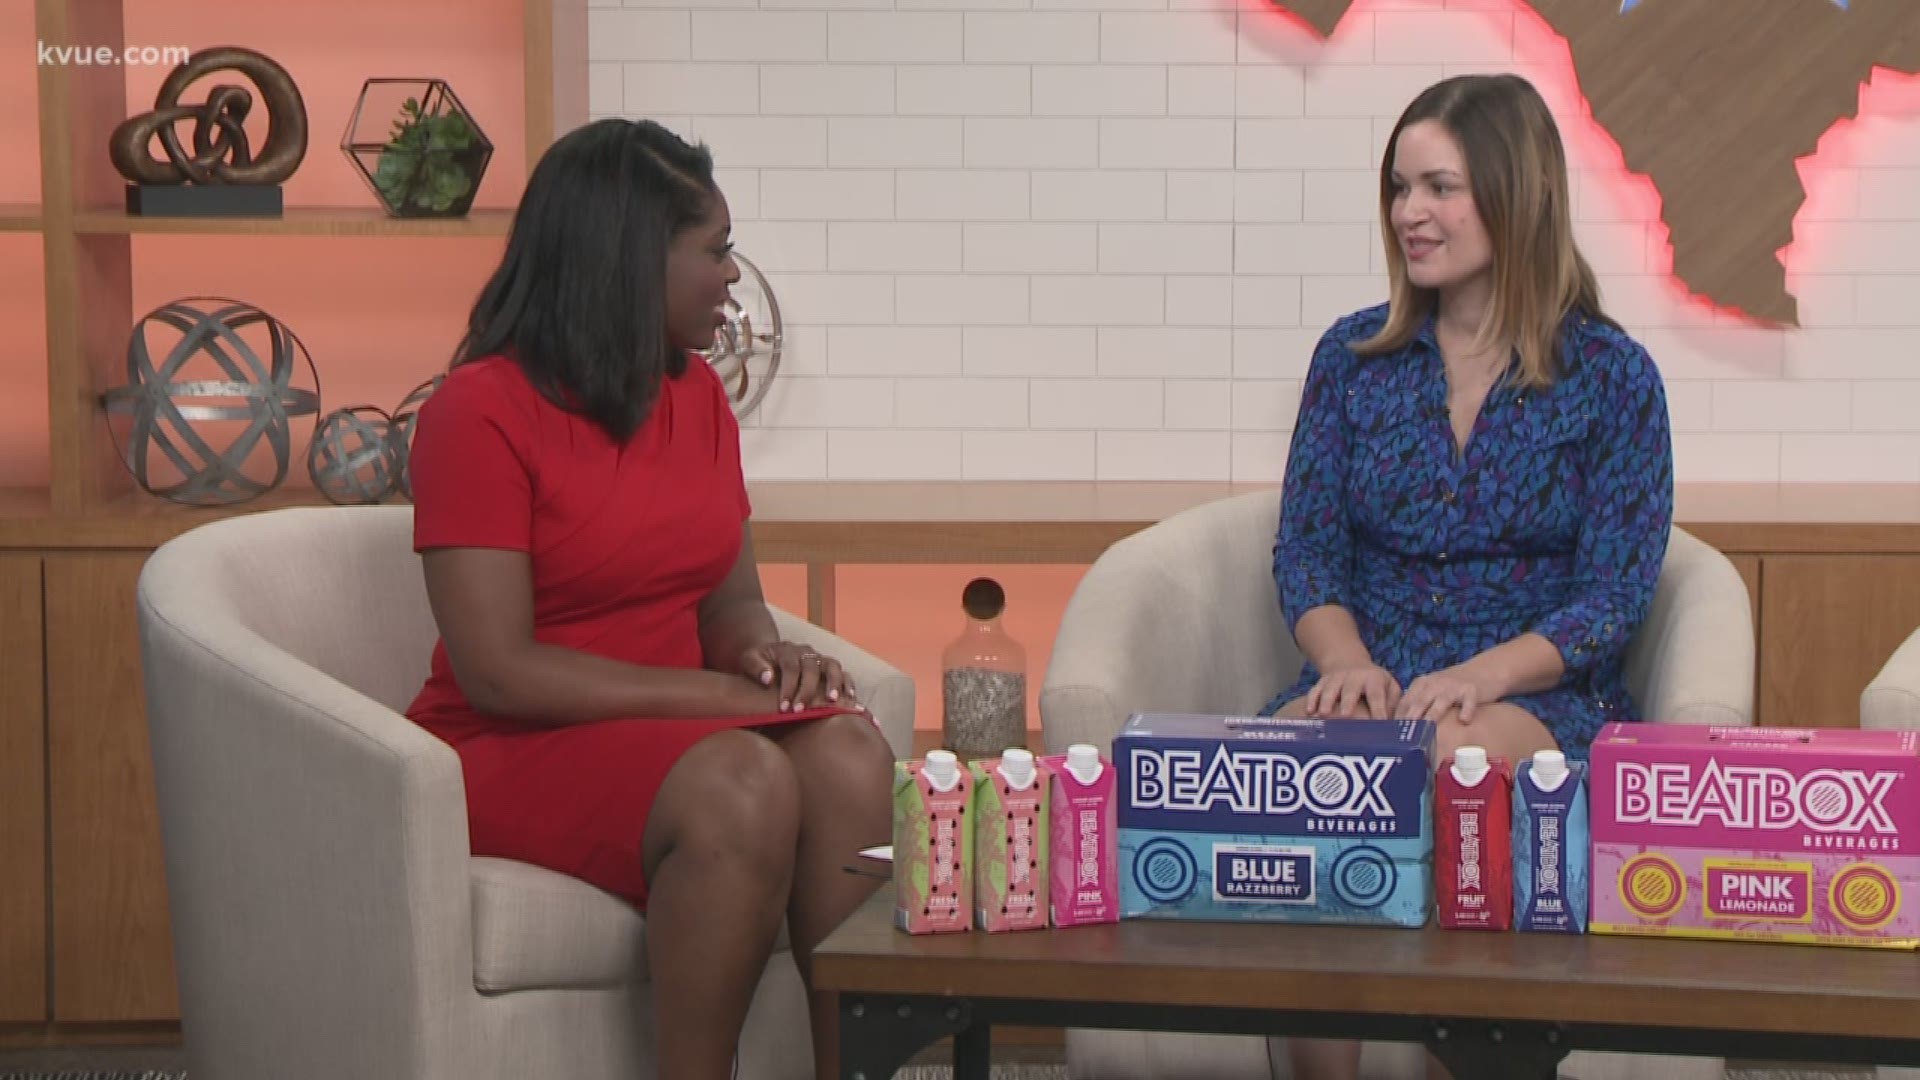 Beatbox might look familiar. We've had them on our midday show before, but now they're back with new flavors for their alcoholic beverages. Beatbox is also hosting events to help local entrepreneurs.